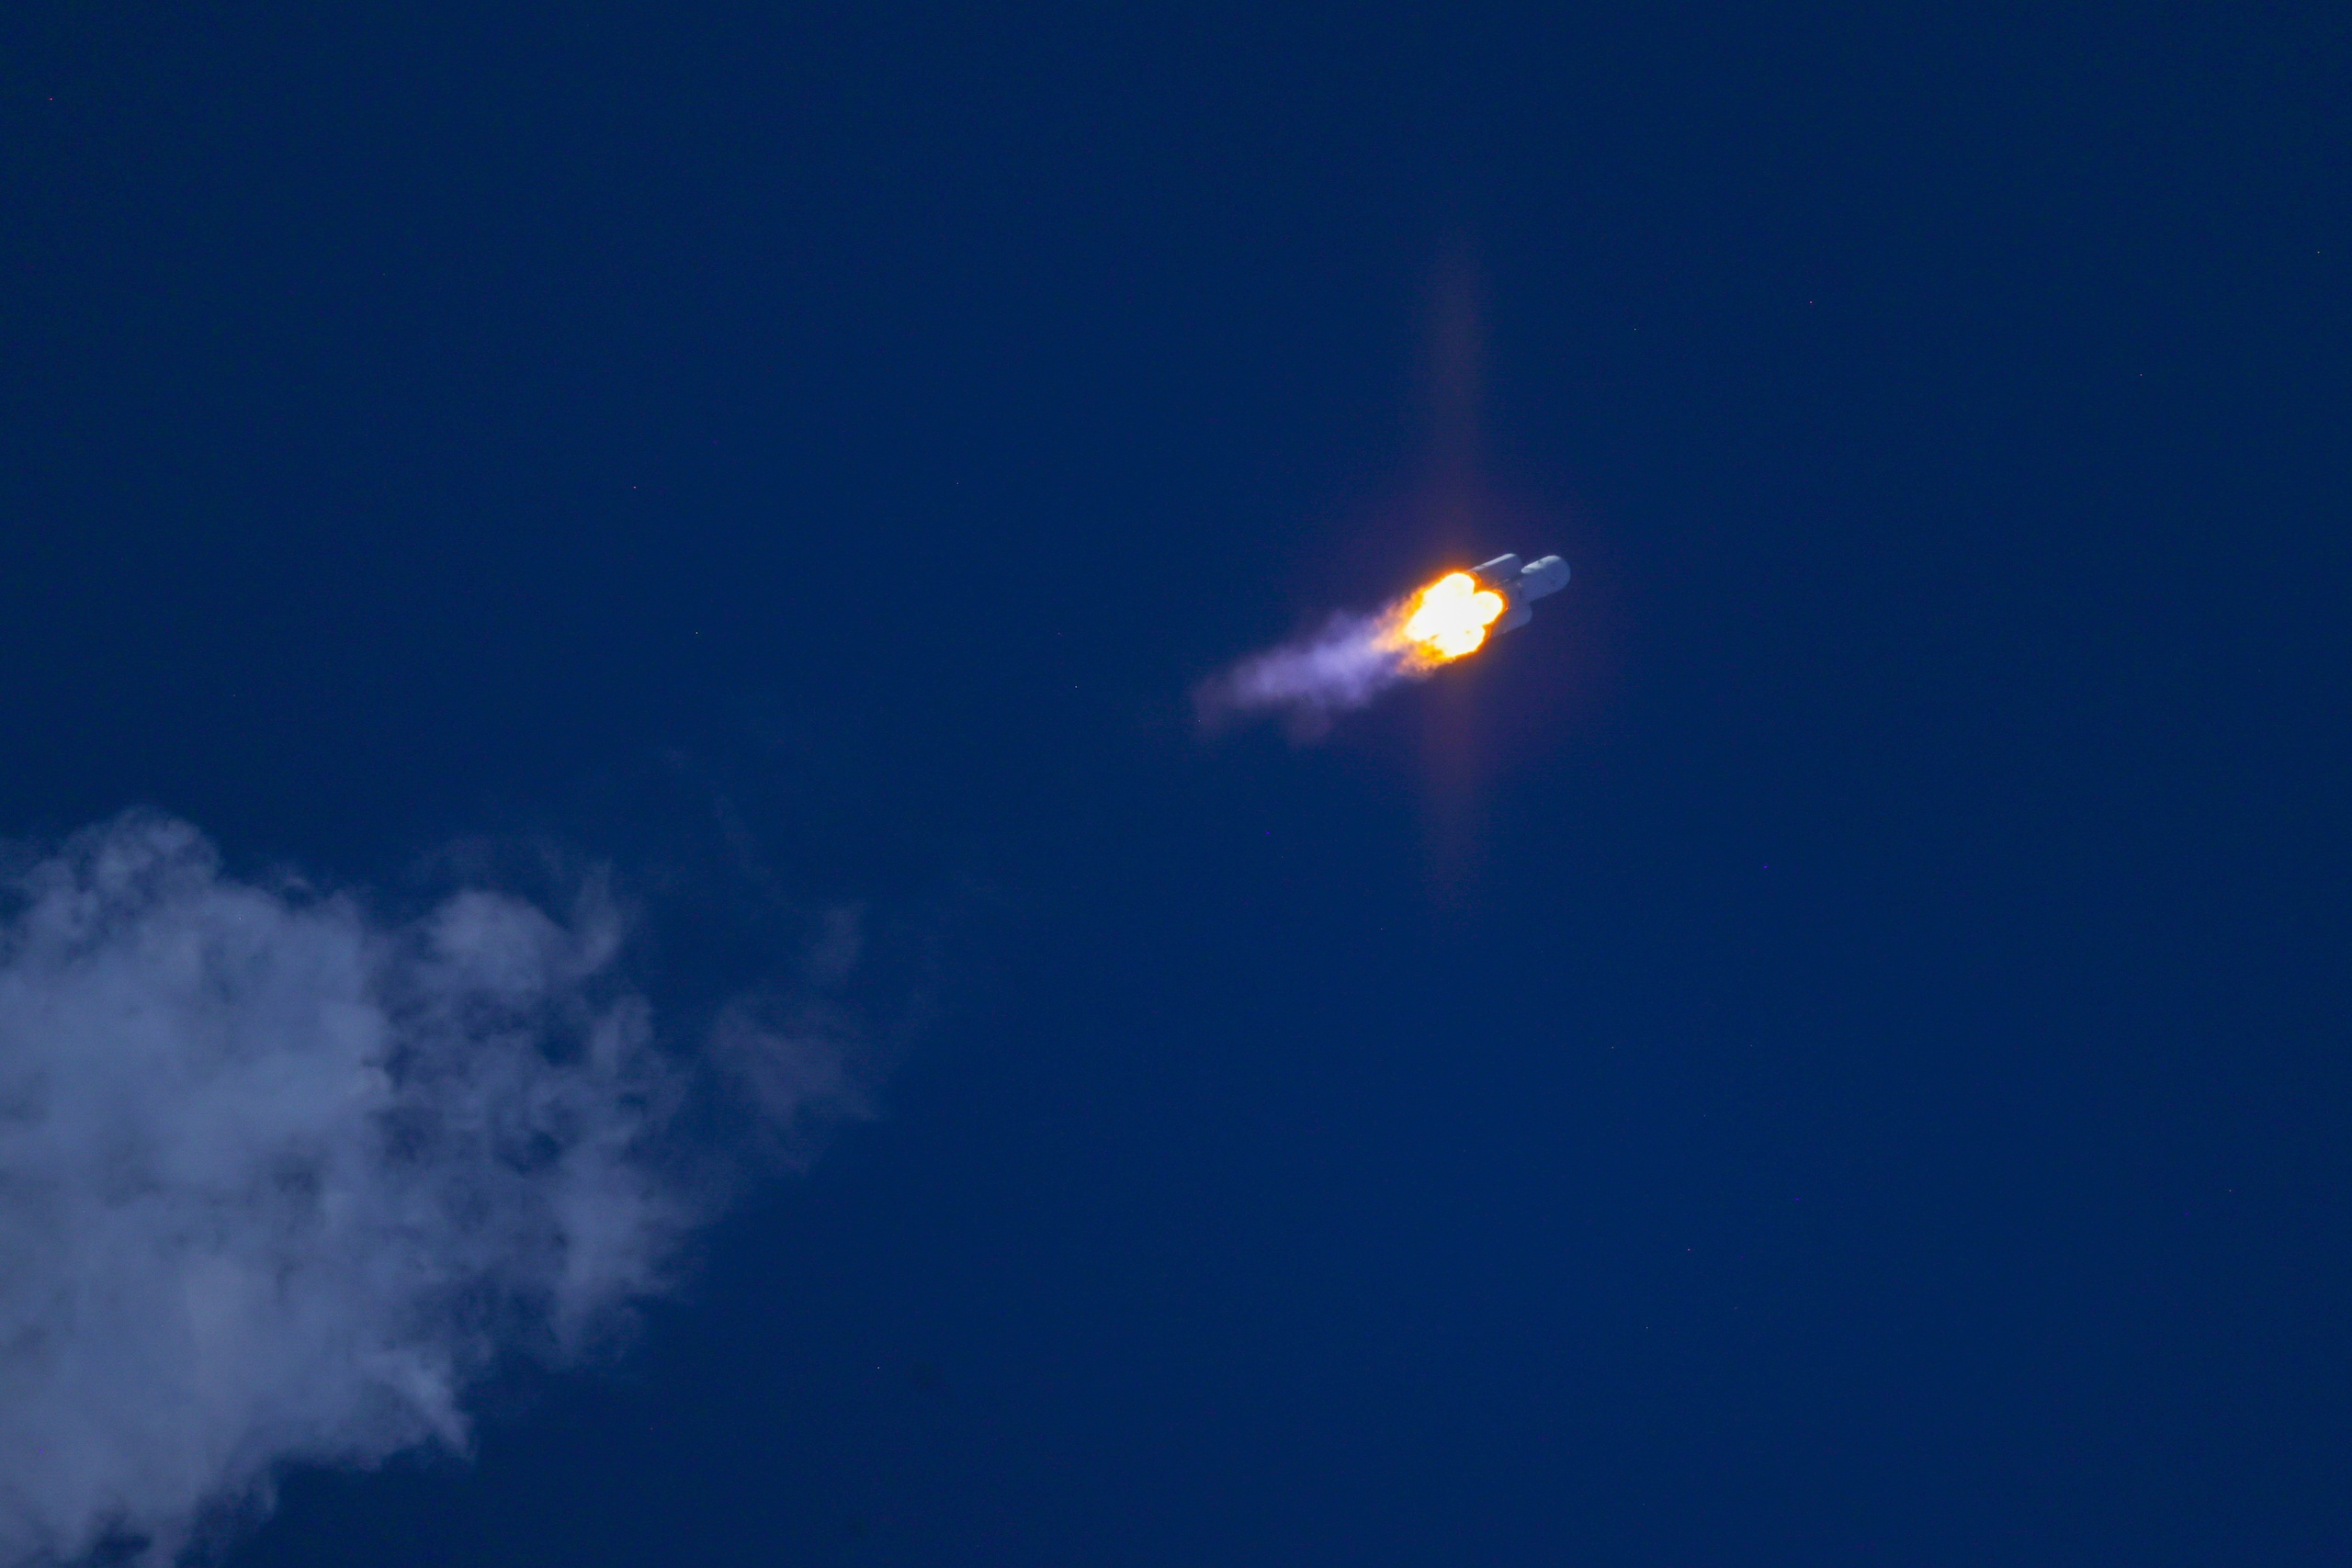 a large white rocket with four smaller boosters lifts off above a plume of fire